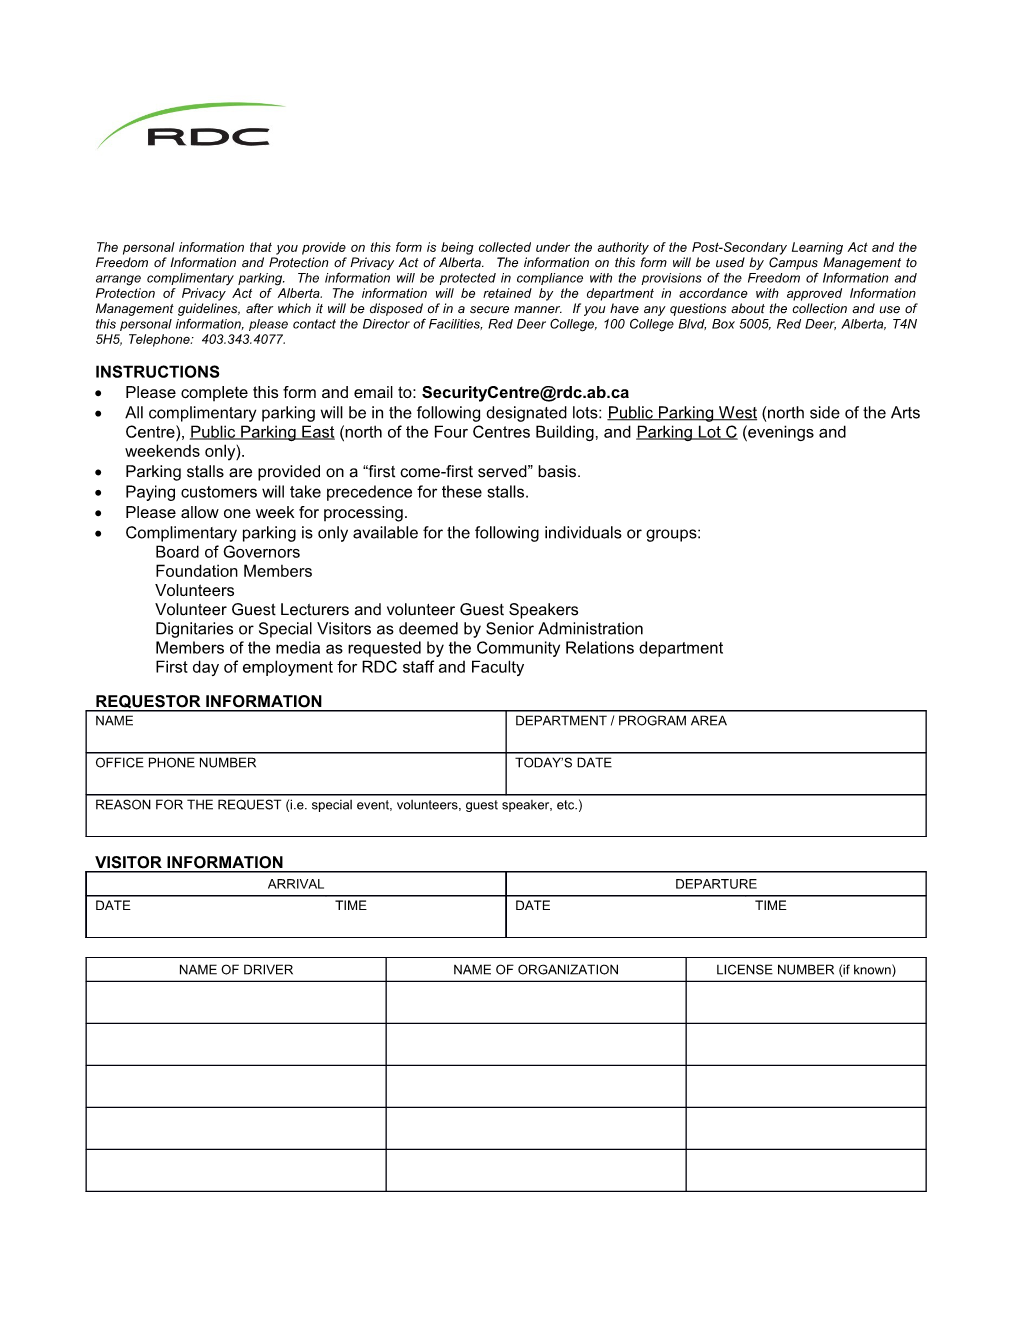 The Personal Informationthat You Provide on This Form Is Being Collected Under the Authority